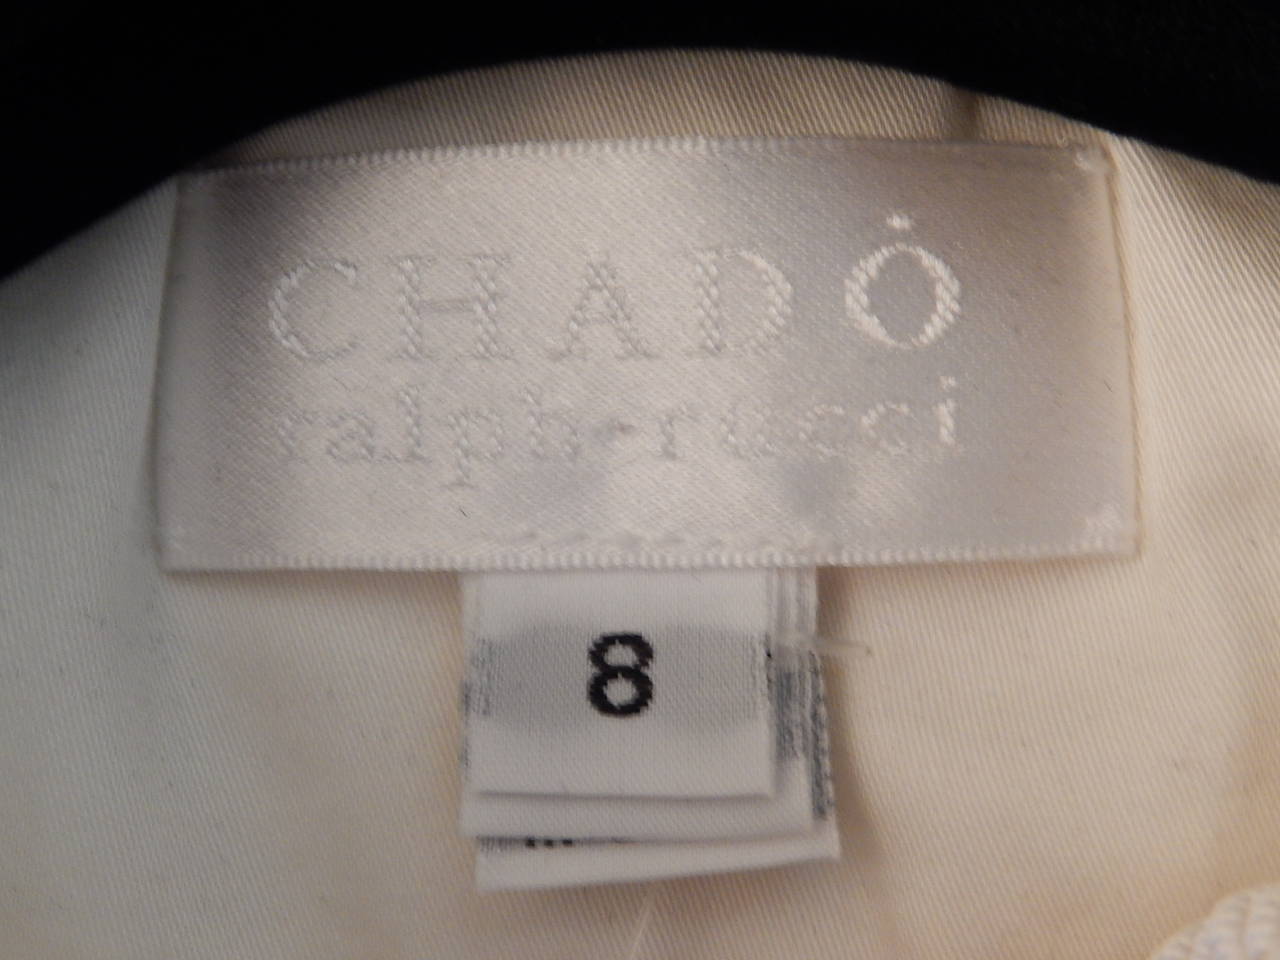 Chado Ralph Rucci Jacket from his book 